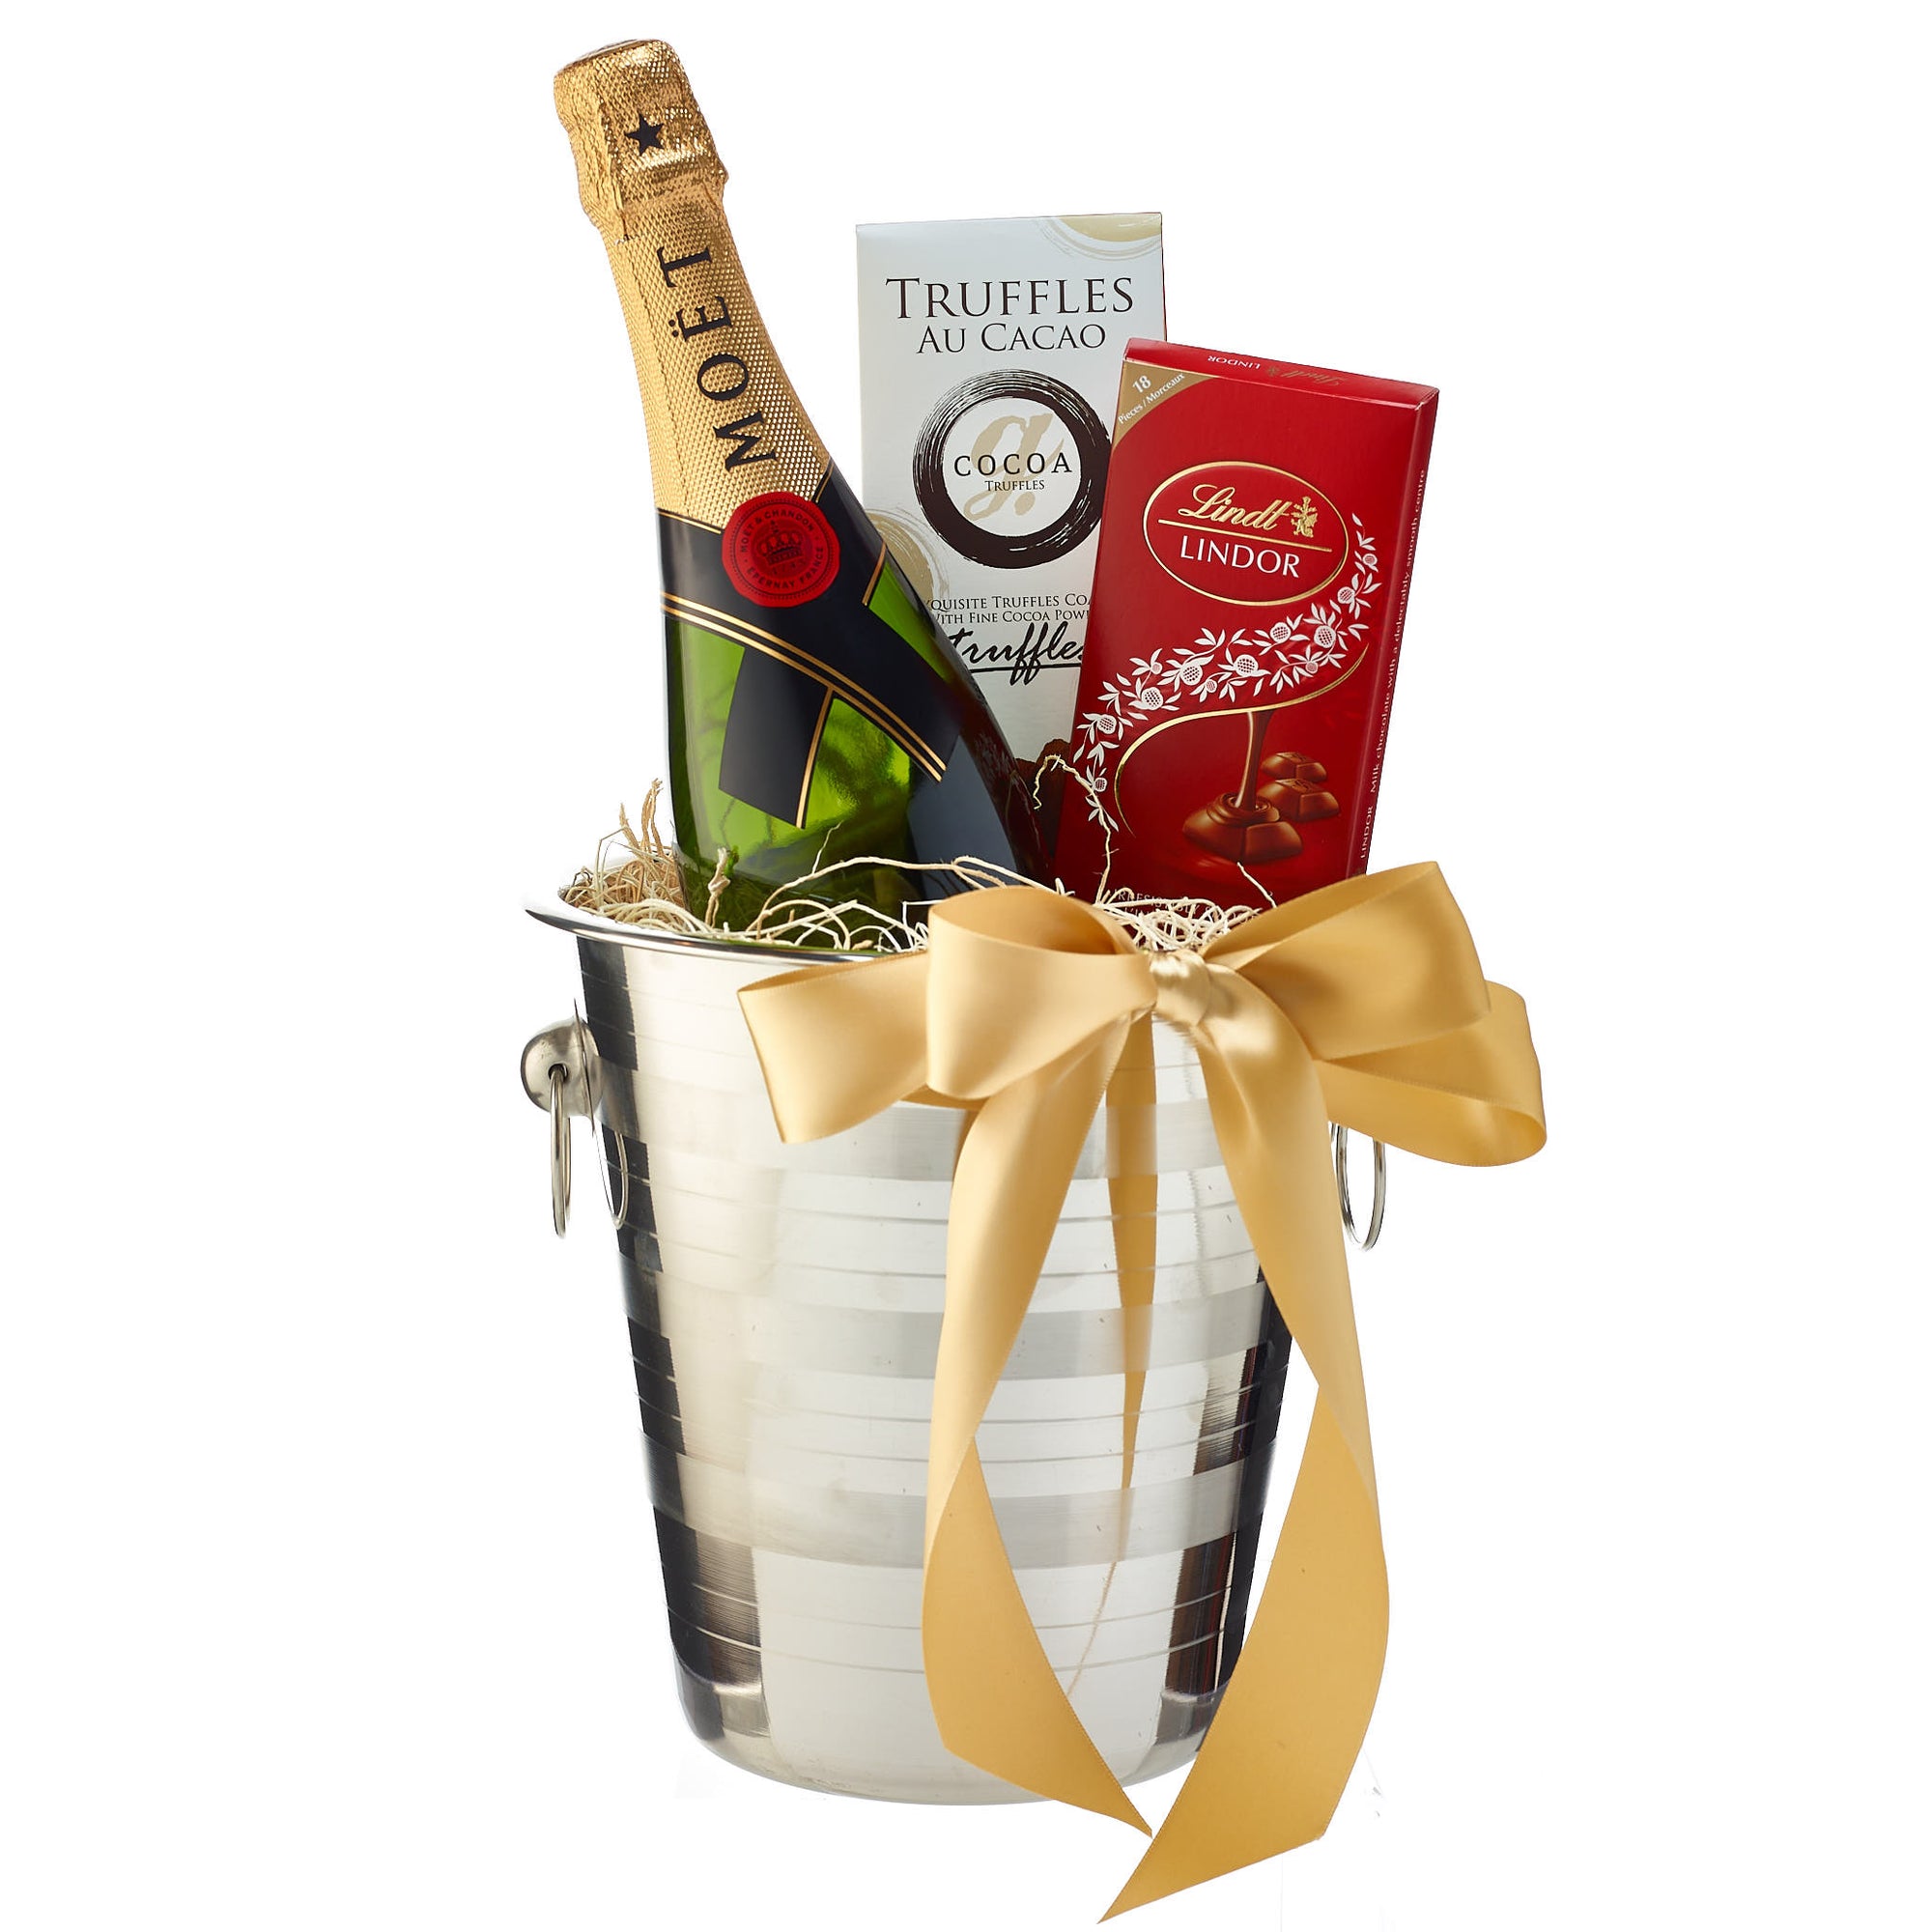 Champagne Gift baskets Delivery Toronto Canada